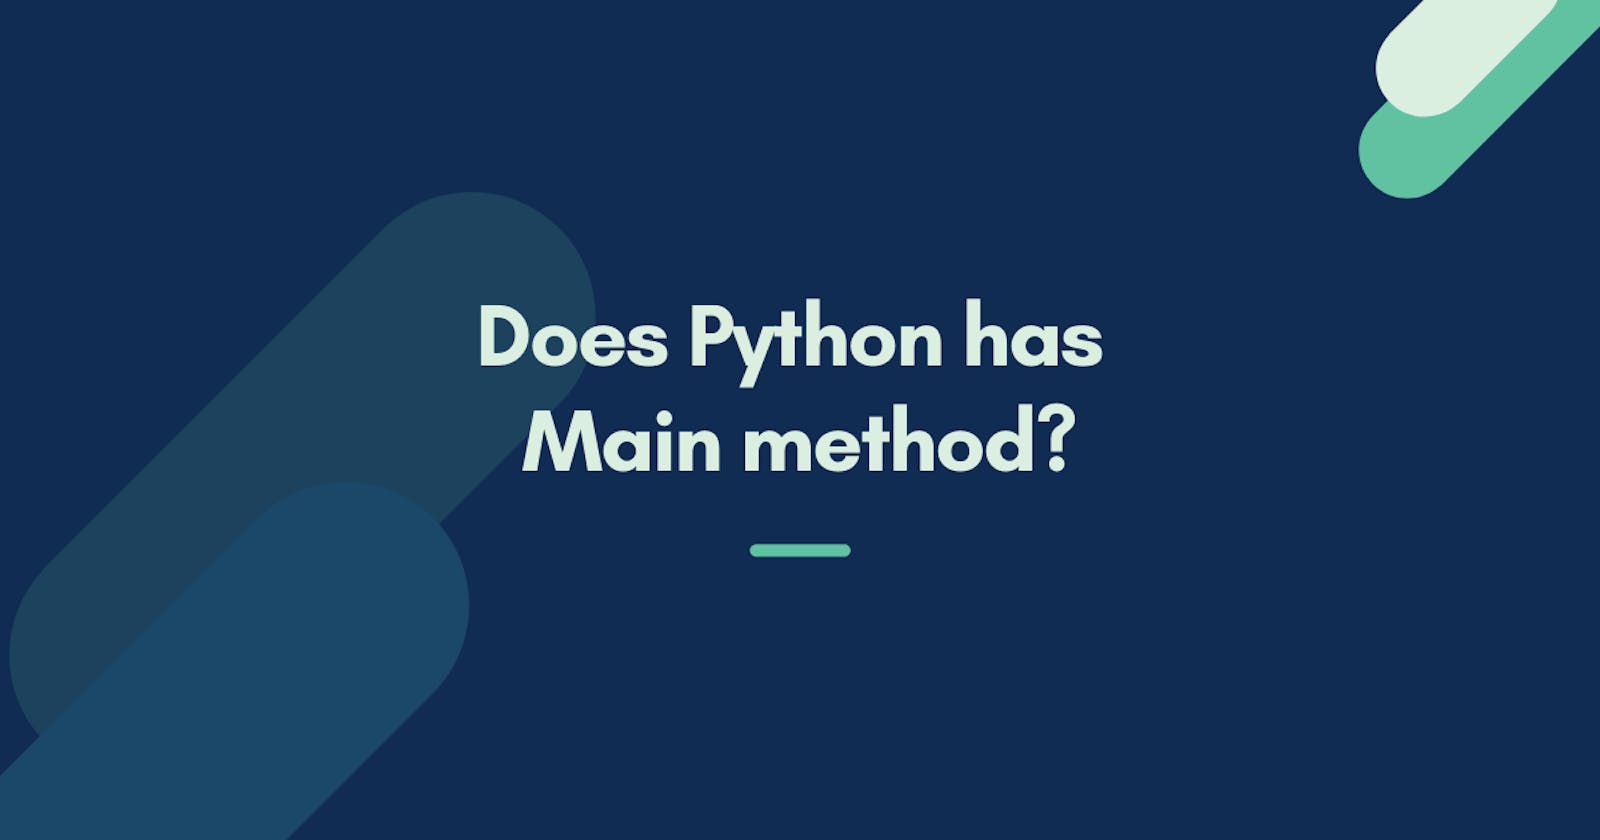 Does Python has a main function?